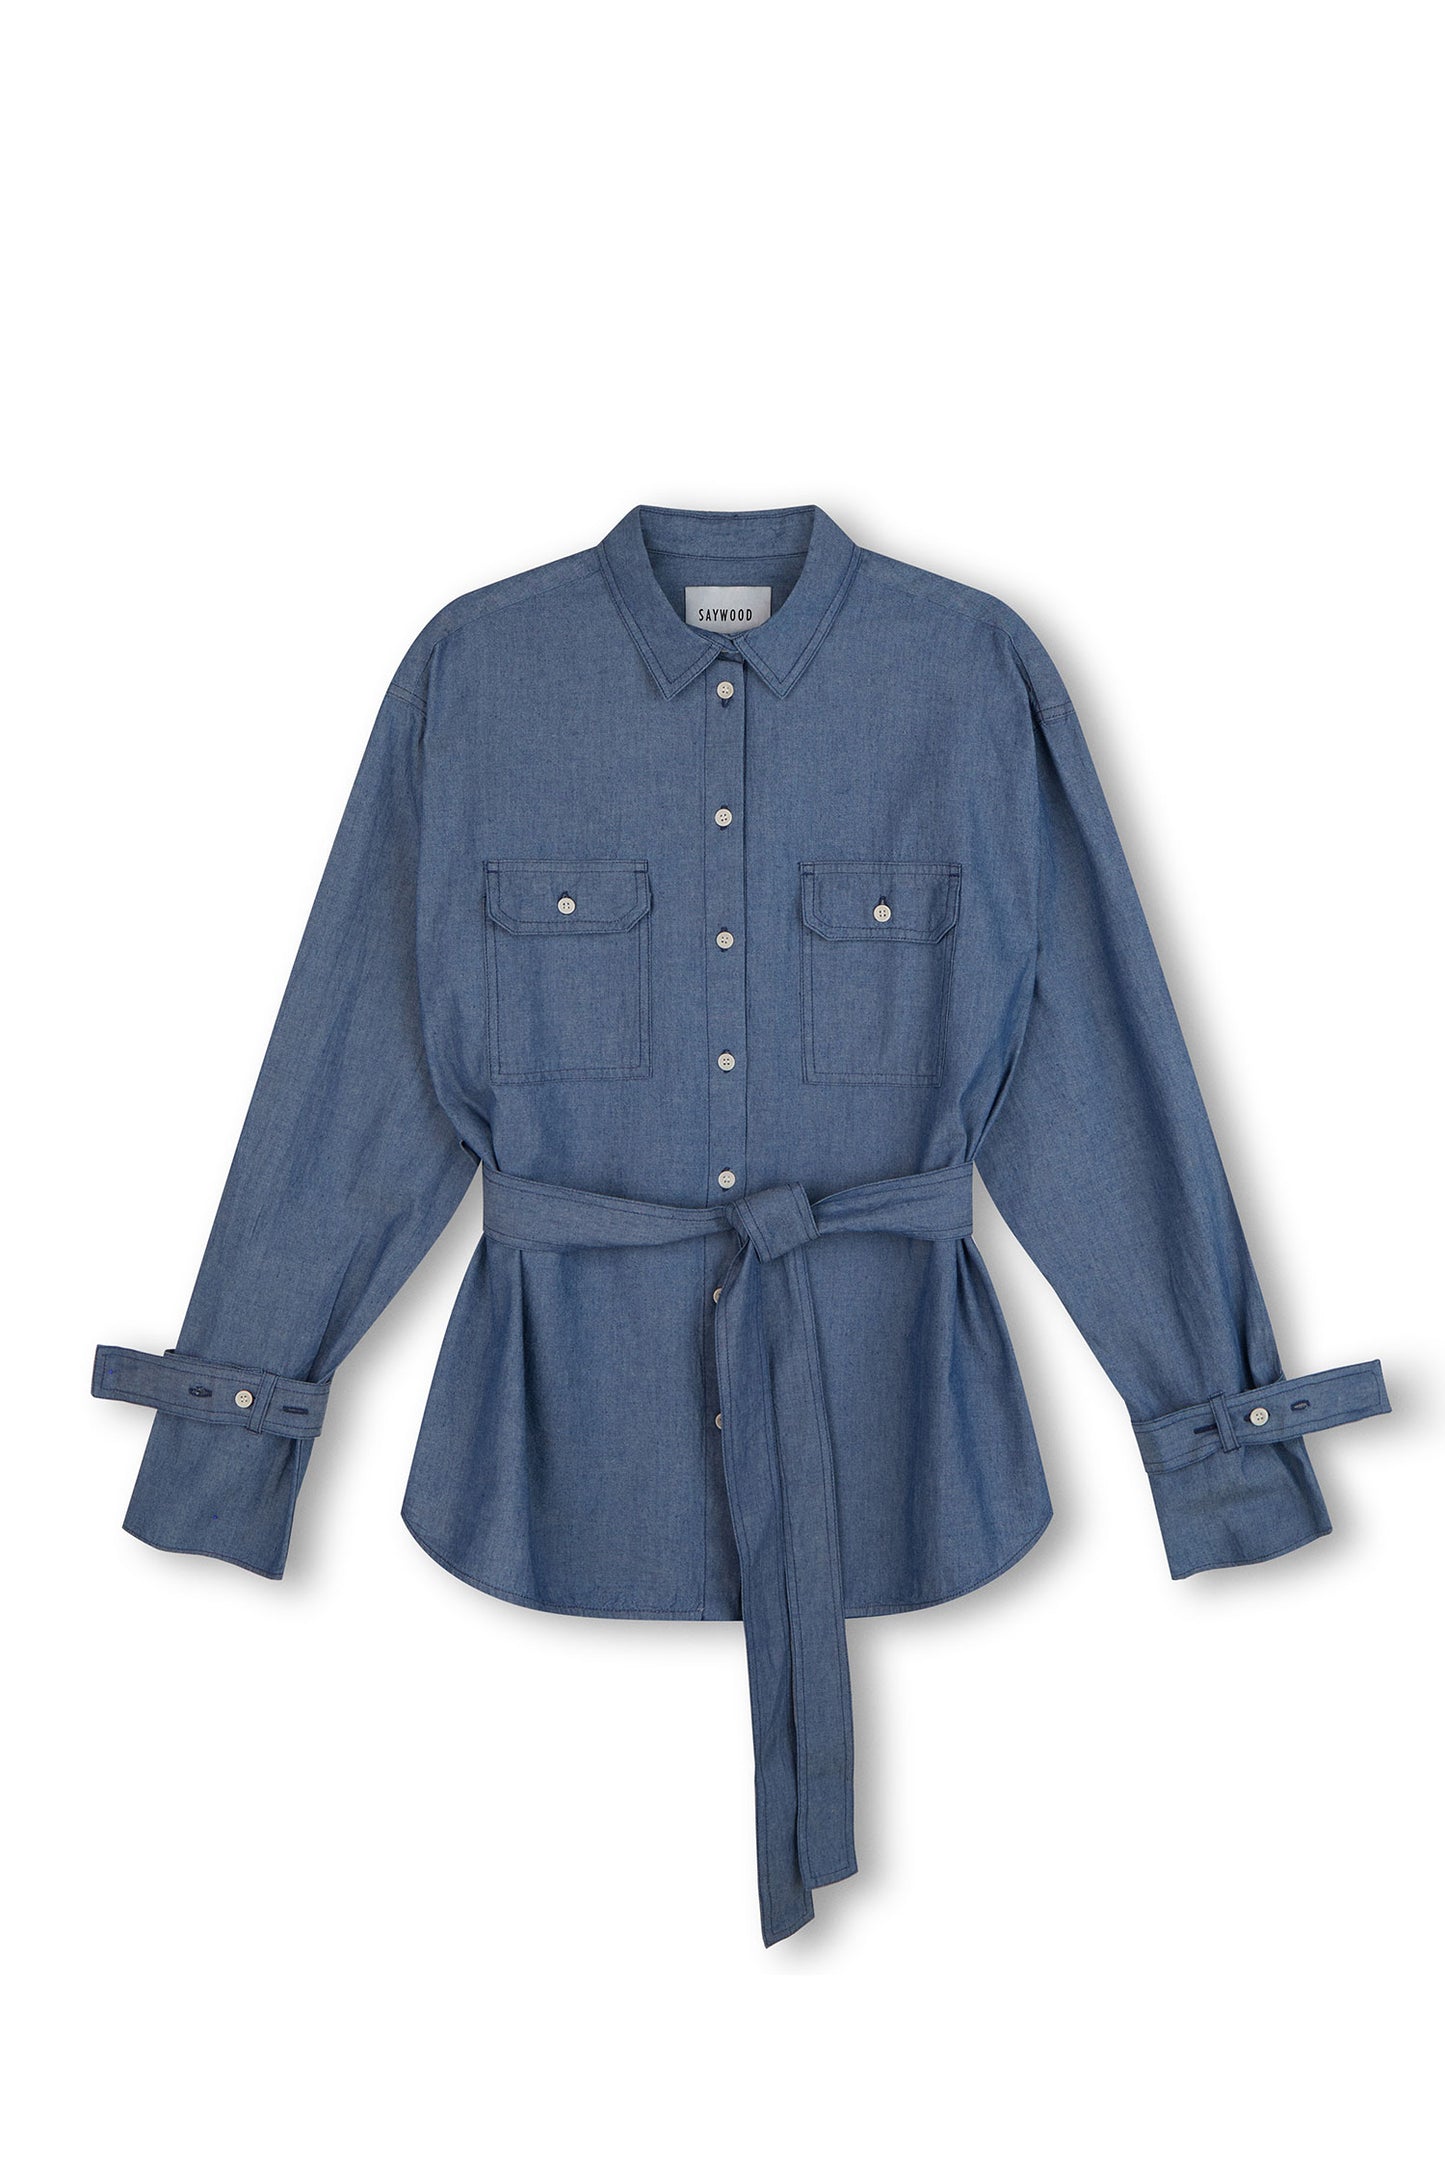 Womens Oversized Shirt Denim. Zadie Boyfriend Fit Shirt in Japanese Denim, light mid wash, with safari styling details, utility patch pockets, with a detachable tie belt and sleeve cuff details, by Saywood.